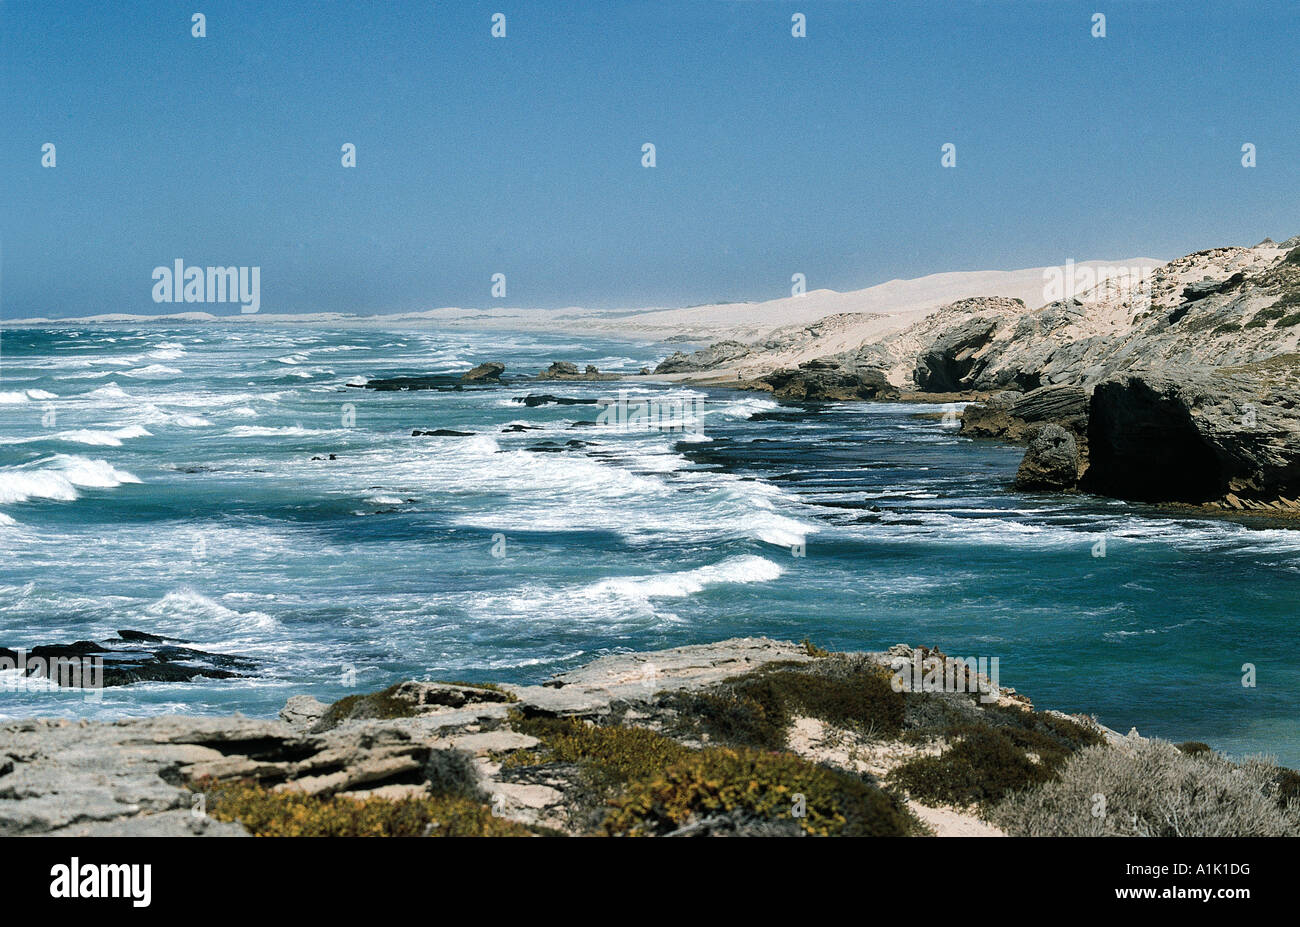 Rough seas on the coastline at Koppie Alleen De Hoop National Reserve Cape Overberg South Africa Stock Photo